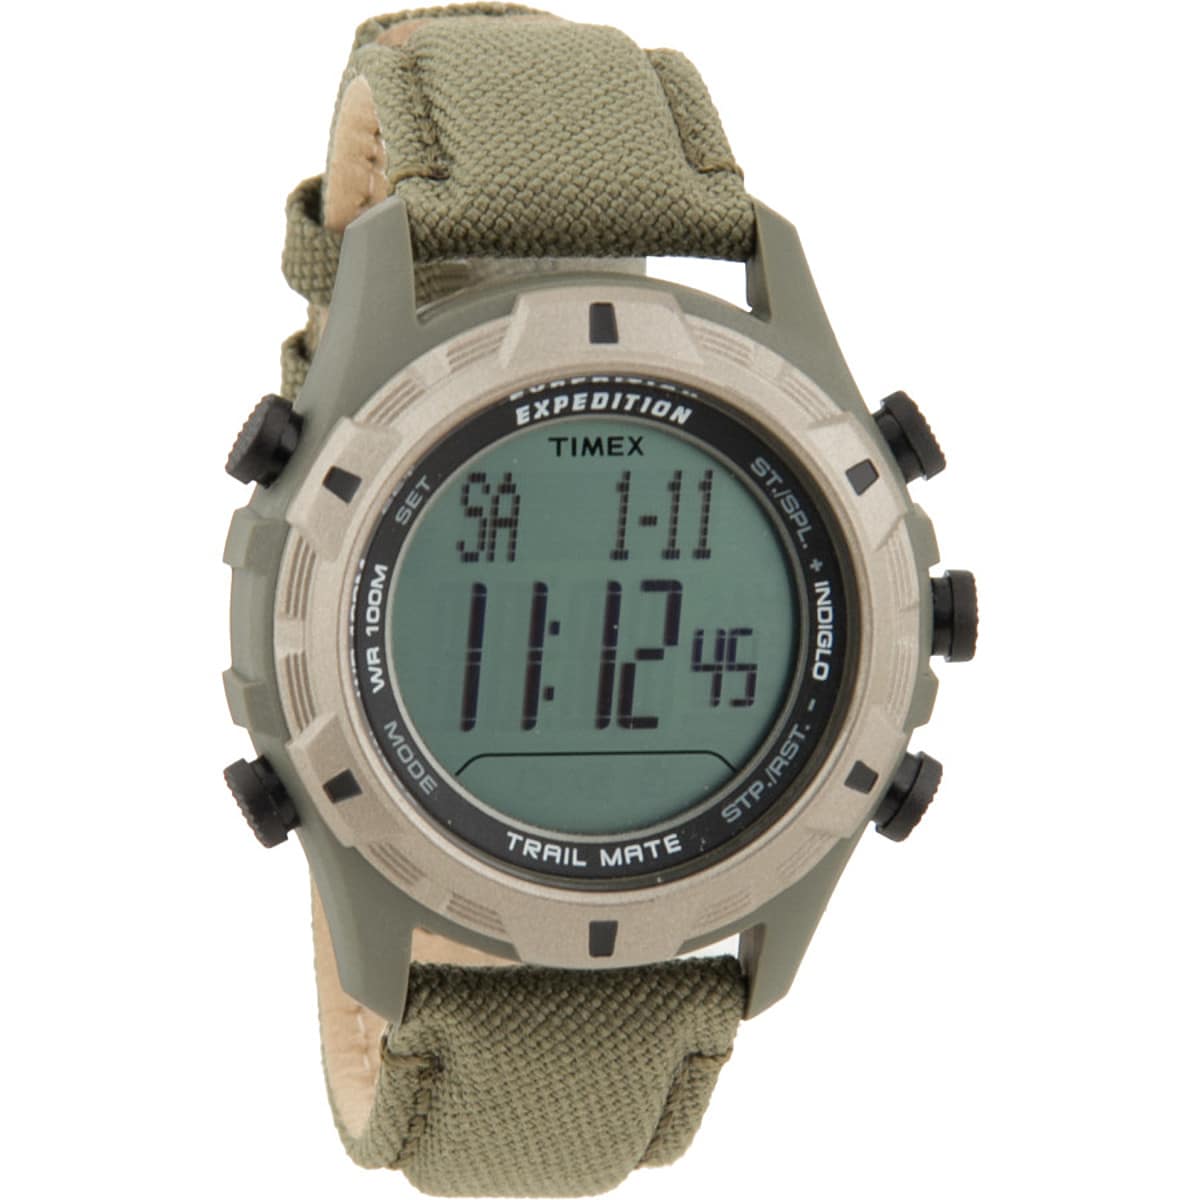 Timex Expedition Trail Mate Digital Watch - Accessories